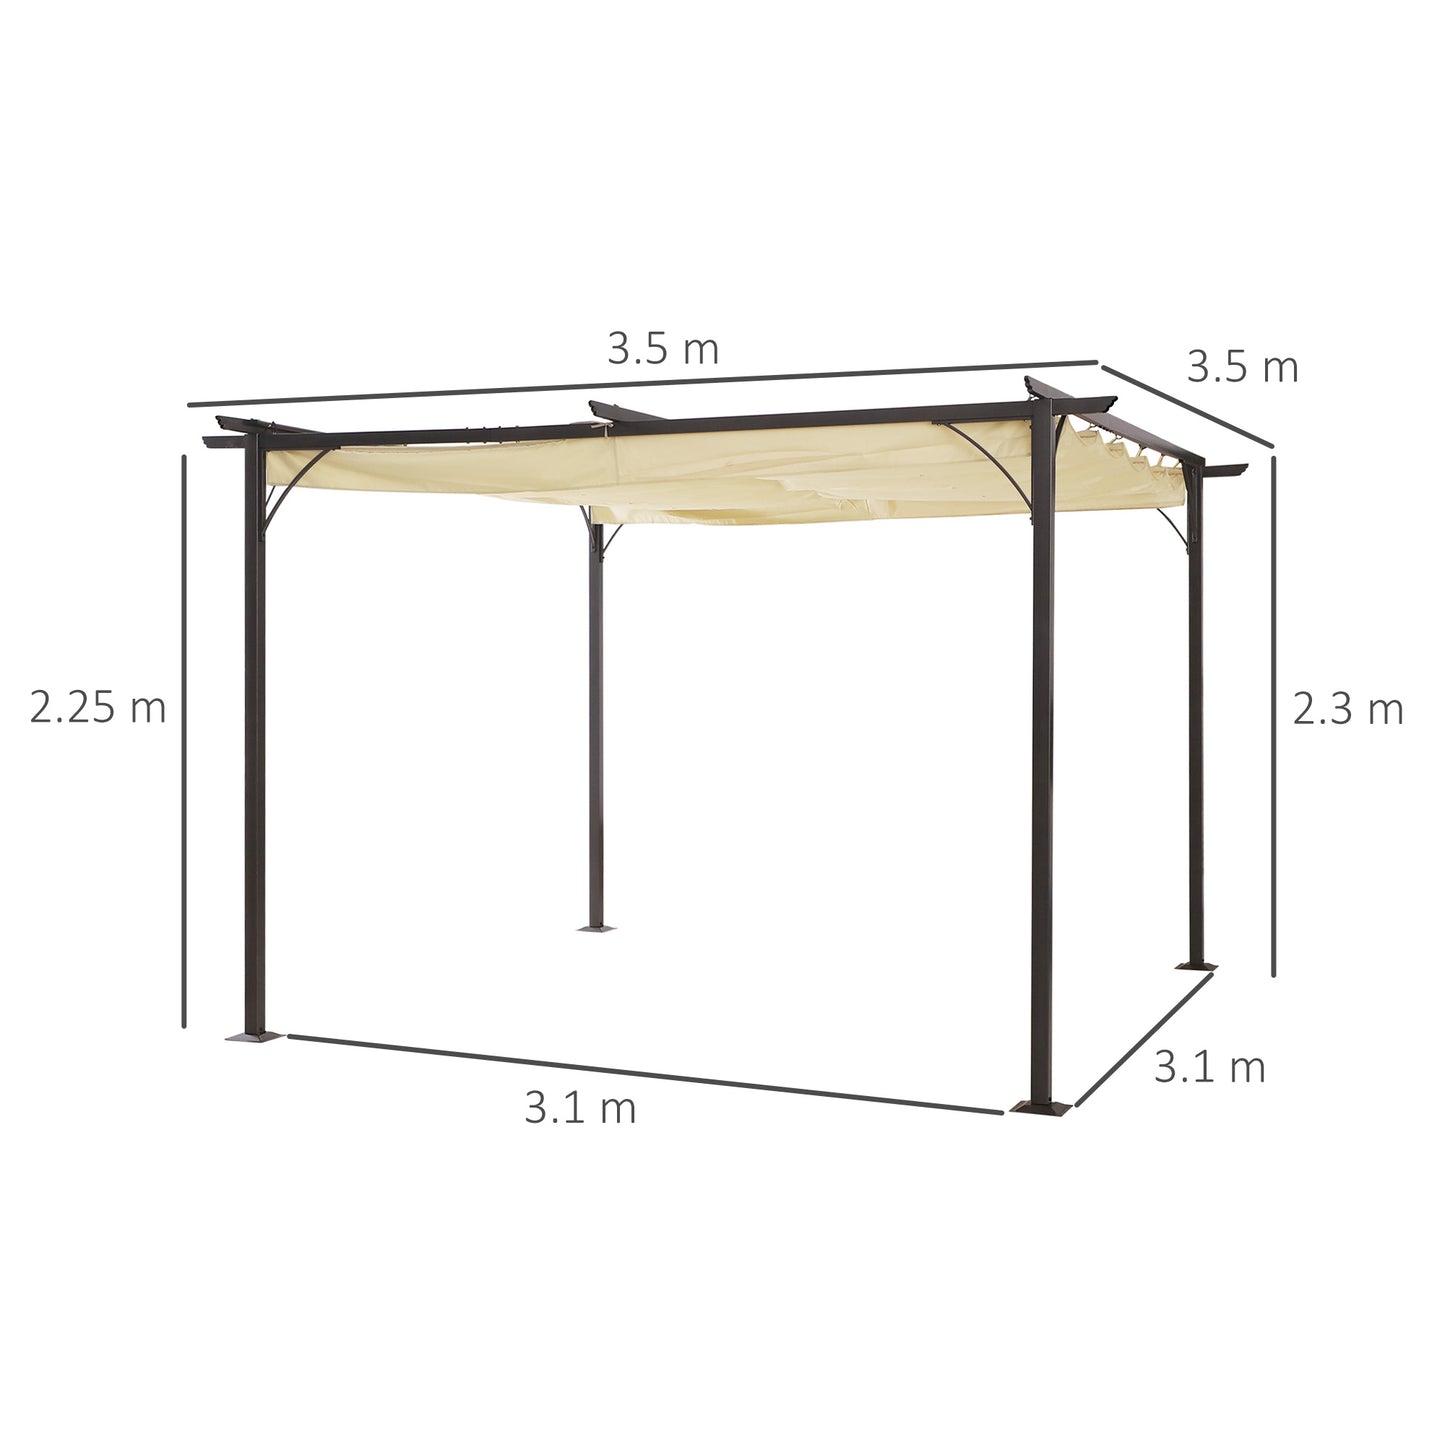 Outsunny 3.5M X 3.5M Metal Pergola Gazebo Awning Retractable Canopy Outdoor Garden Sun Shade Shelter Marquee Party BBQ, Beige